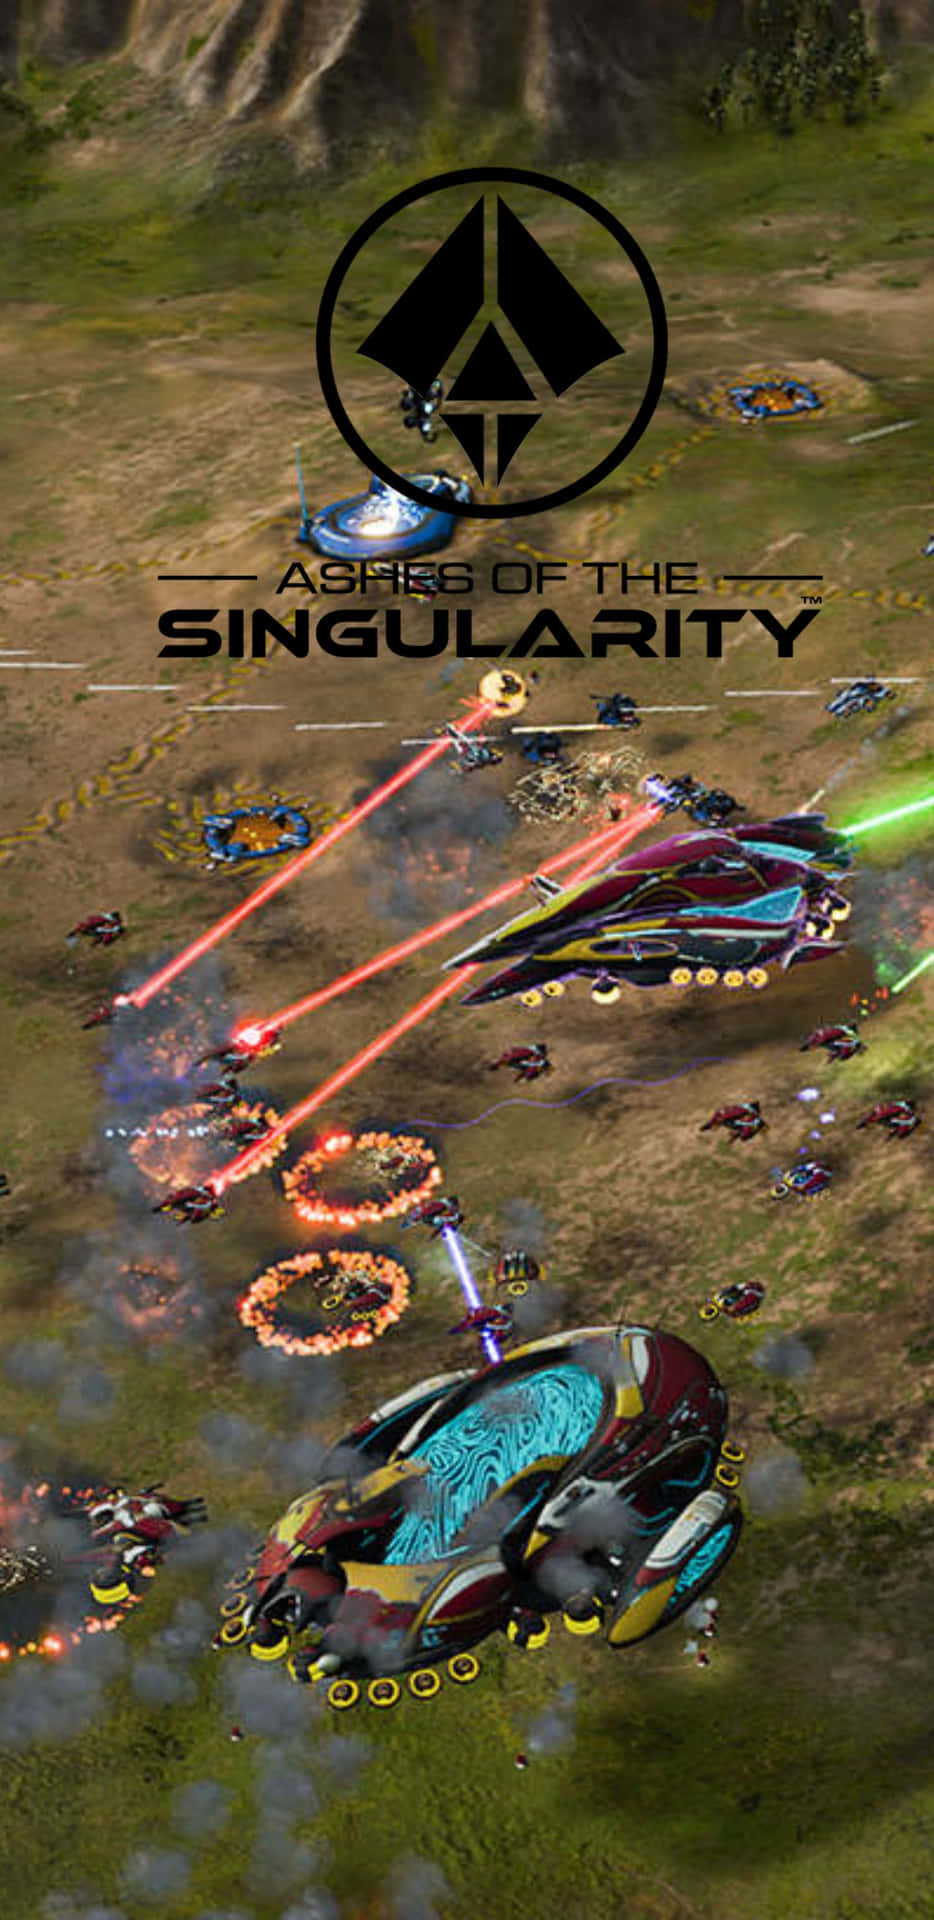 Enjoy the amazing graphics of Ashes of the Singularity on your Pixel 3xl.